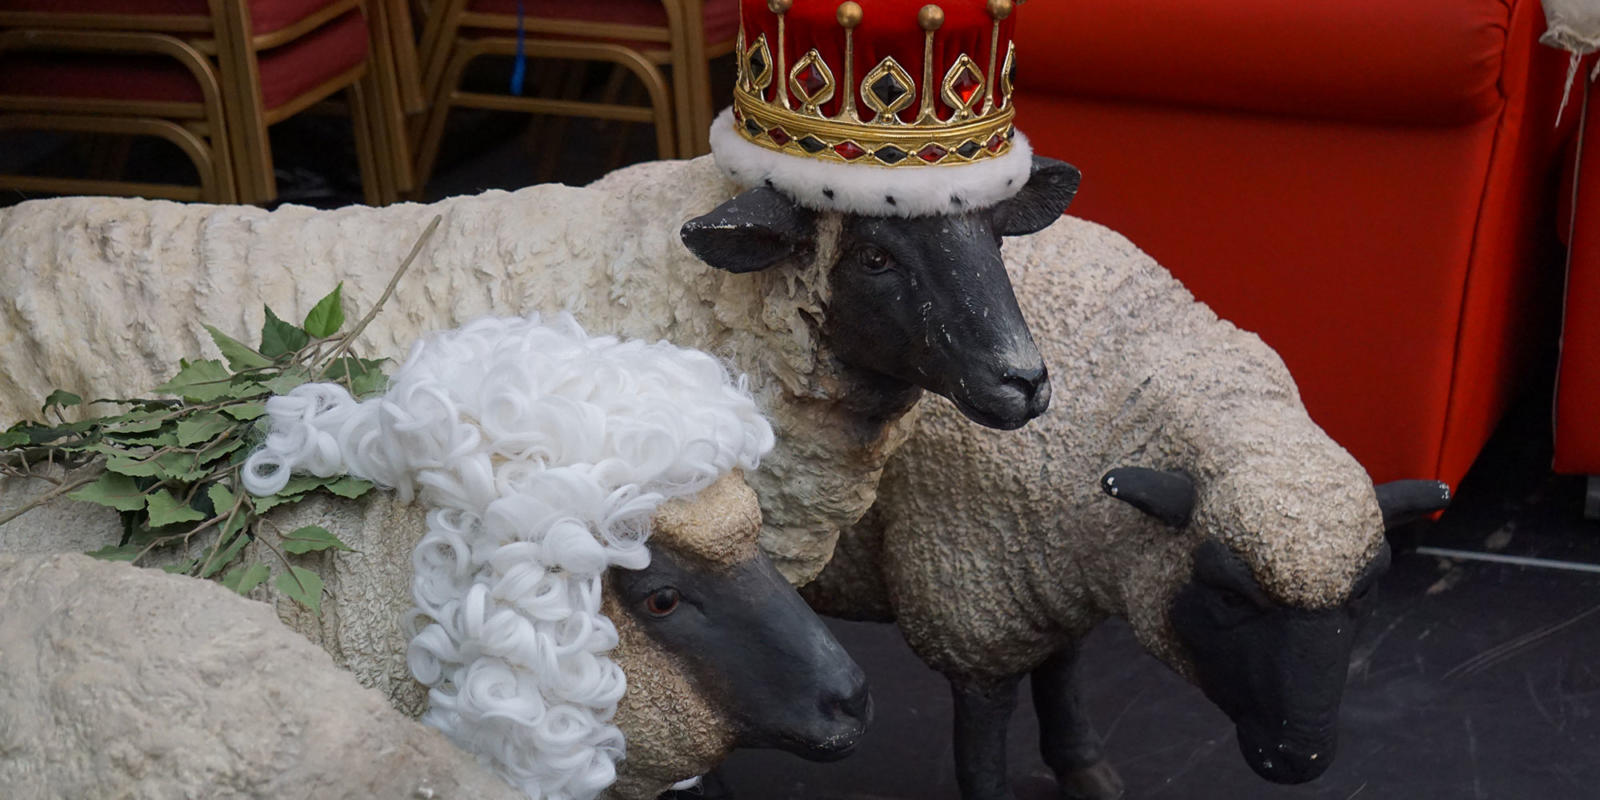 Three sheep props wearing wigs and a crown for ENO's Iolanthe